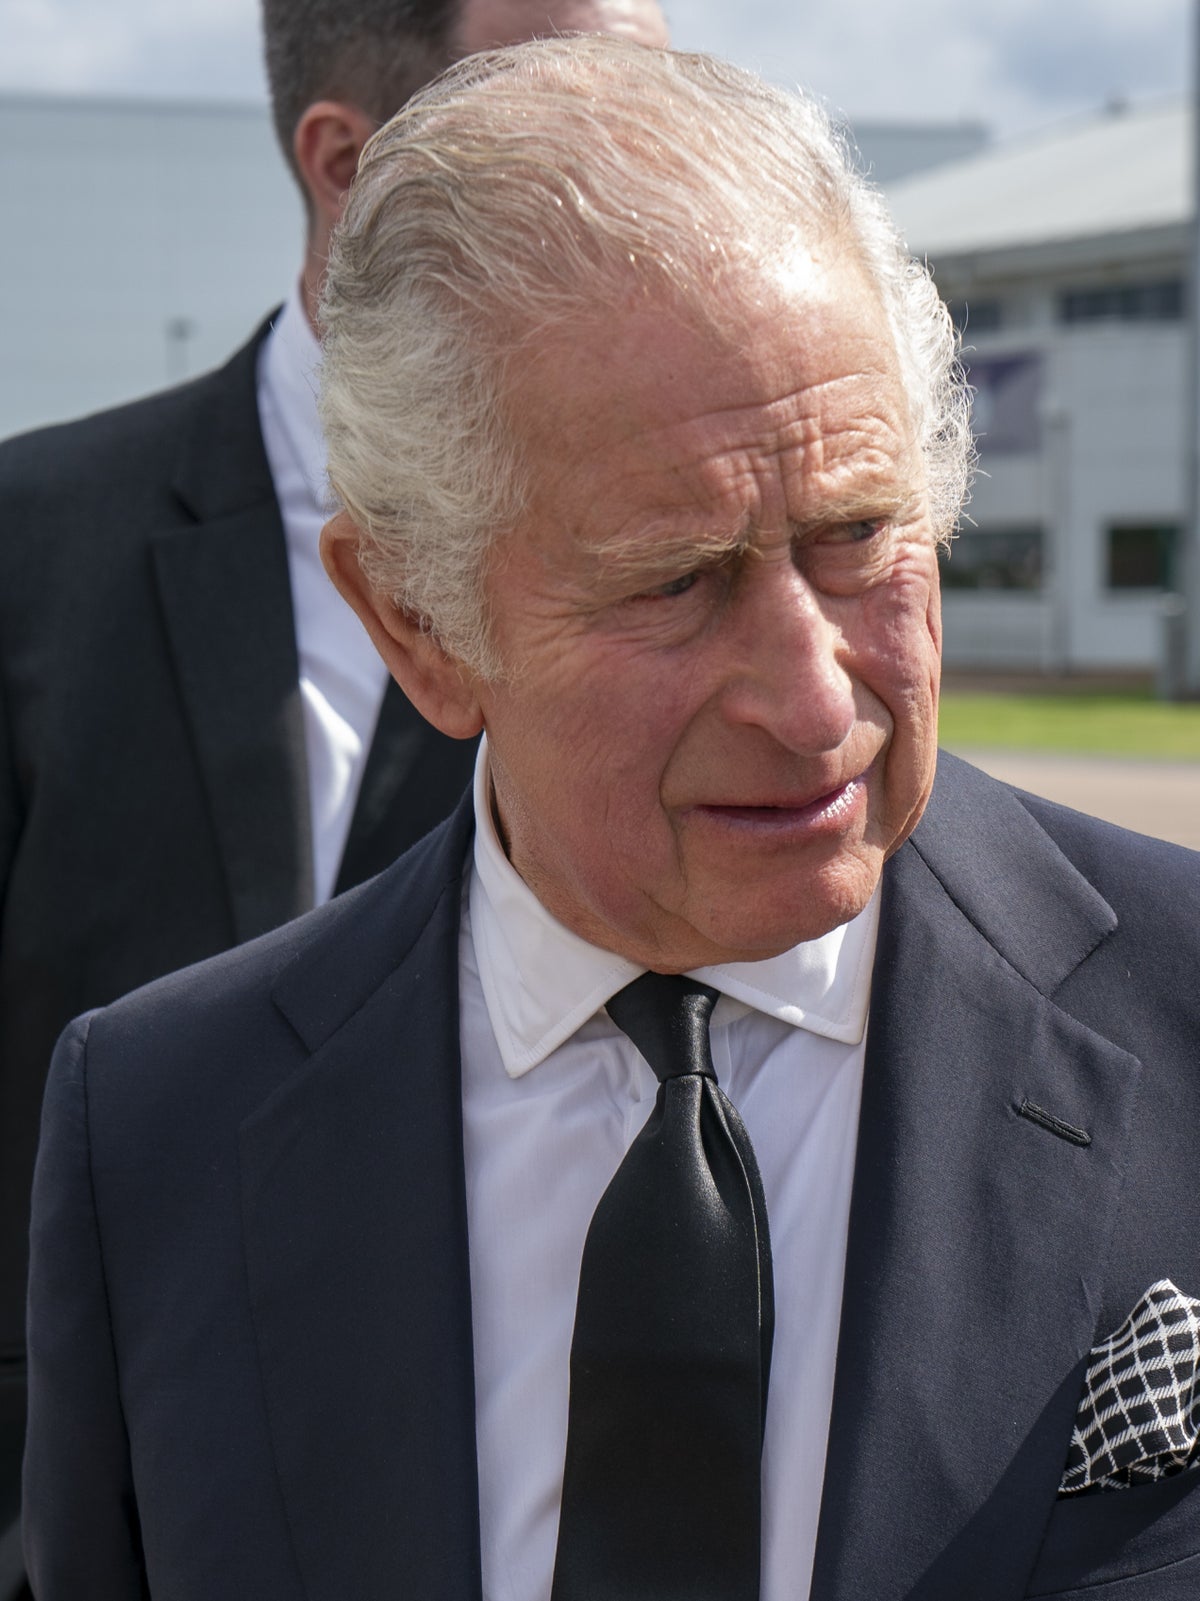 Charles to be formally declared King at Accession Council ceremony